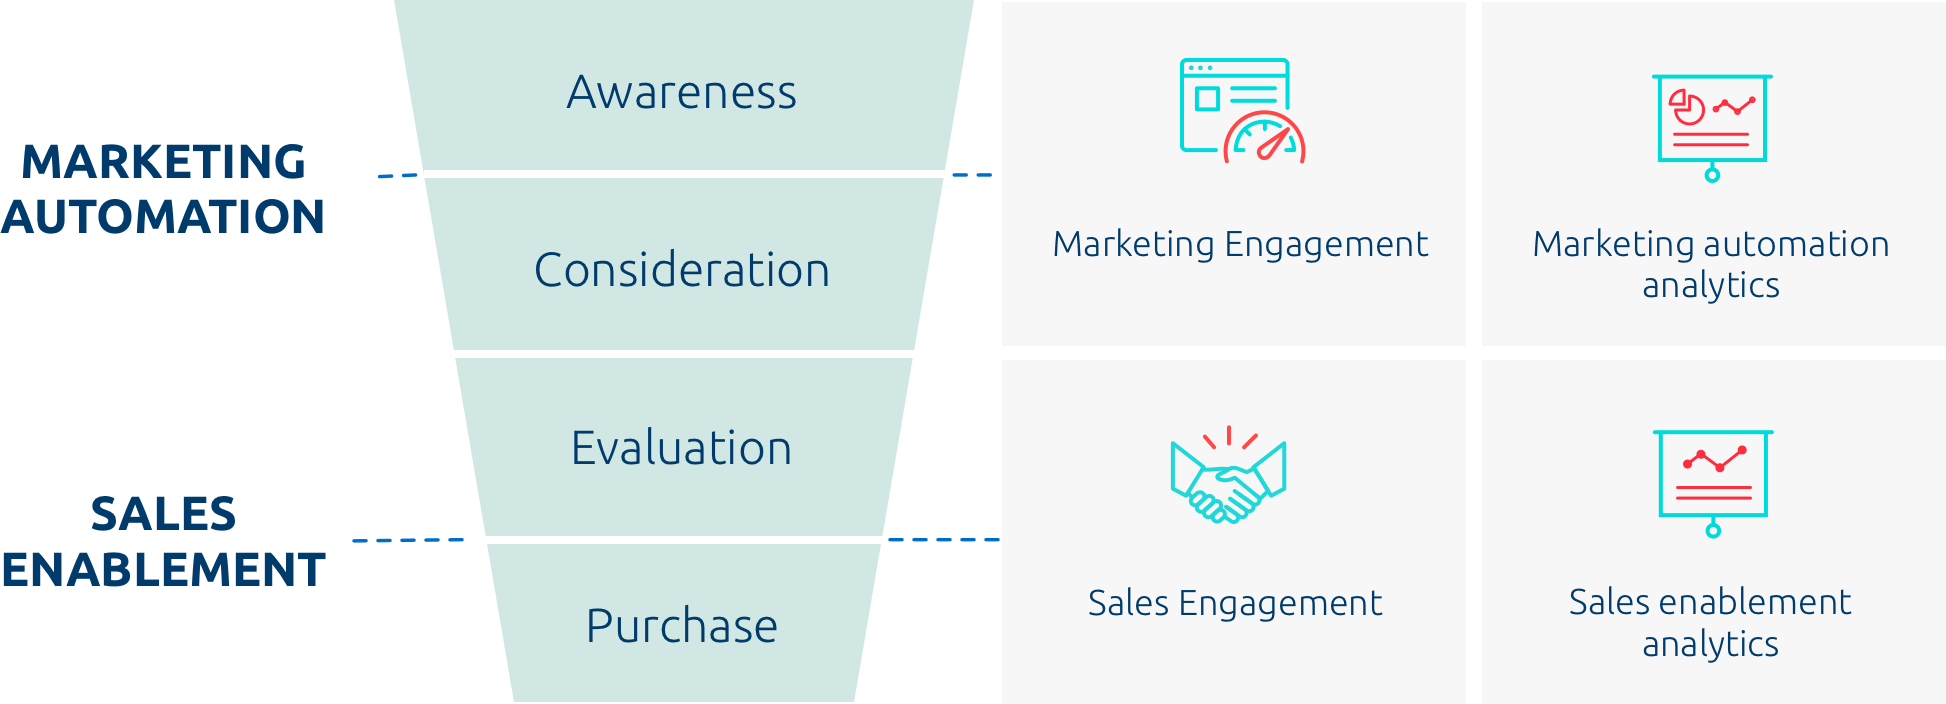 What is sales enablement?